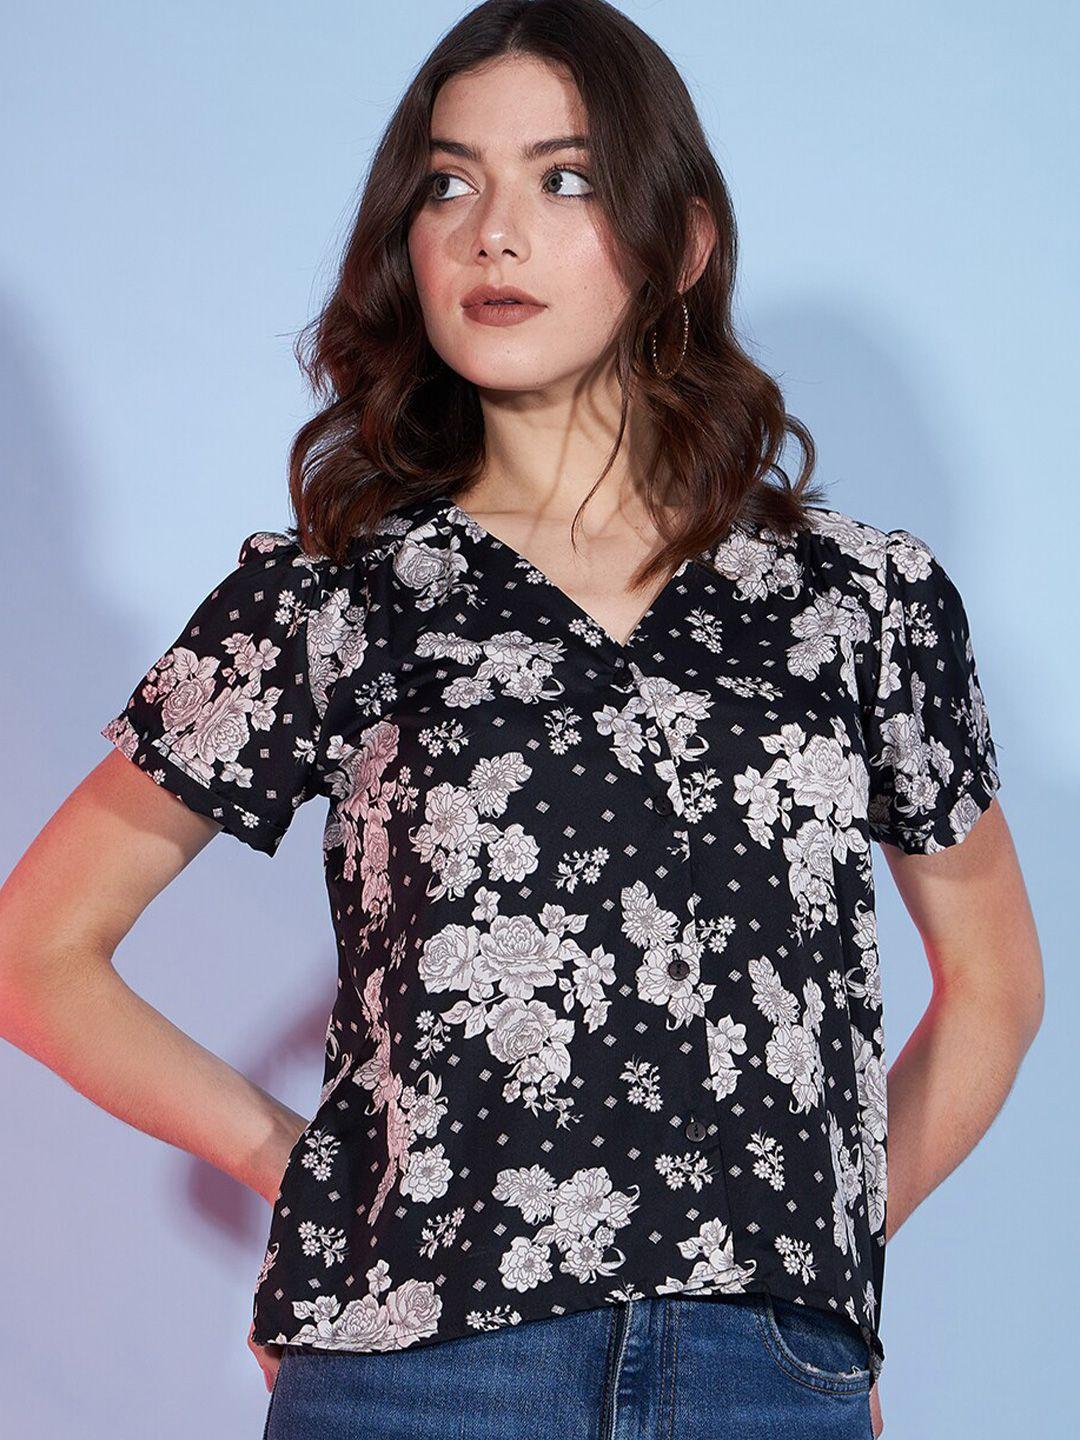 dressberry black floral print puff sleeve shirt style top